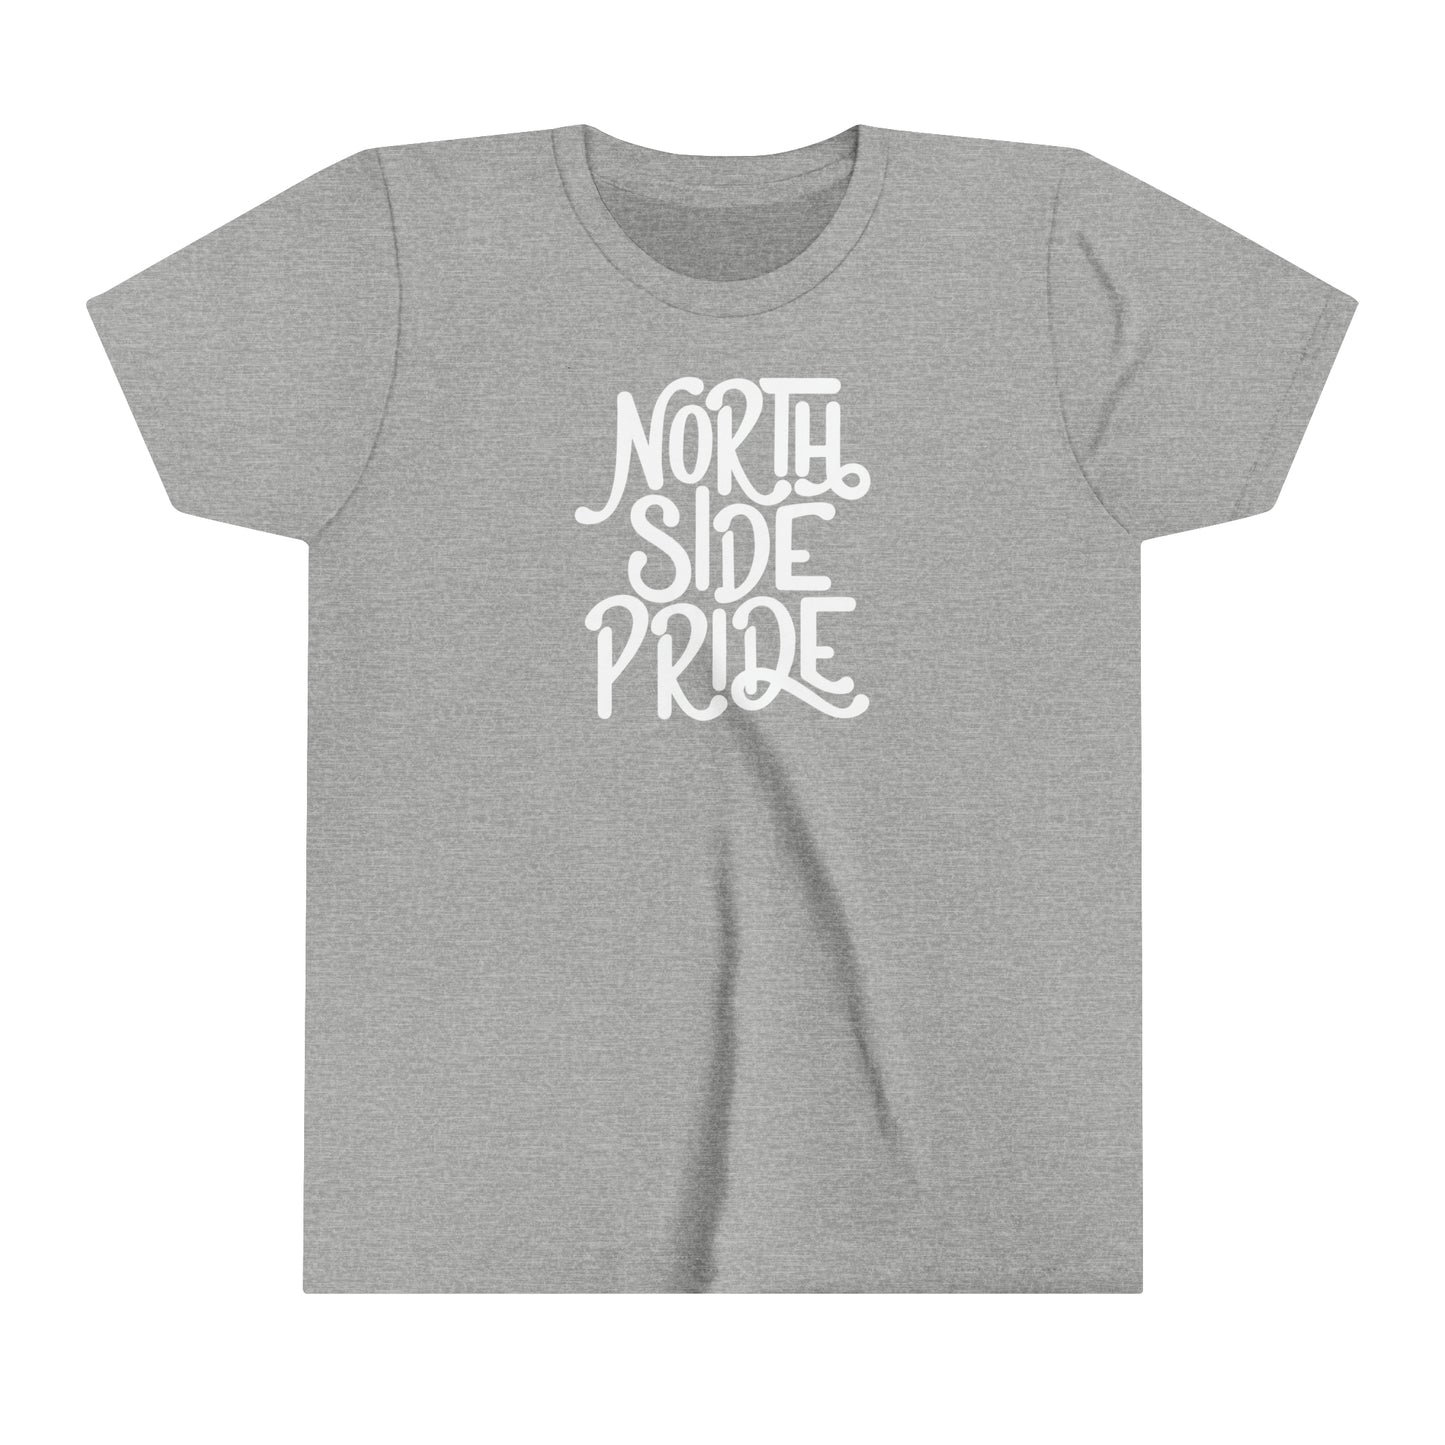 North Side Pride Youth Tee. Gray.